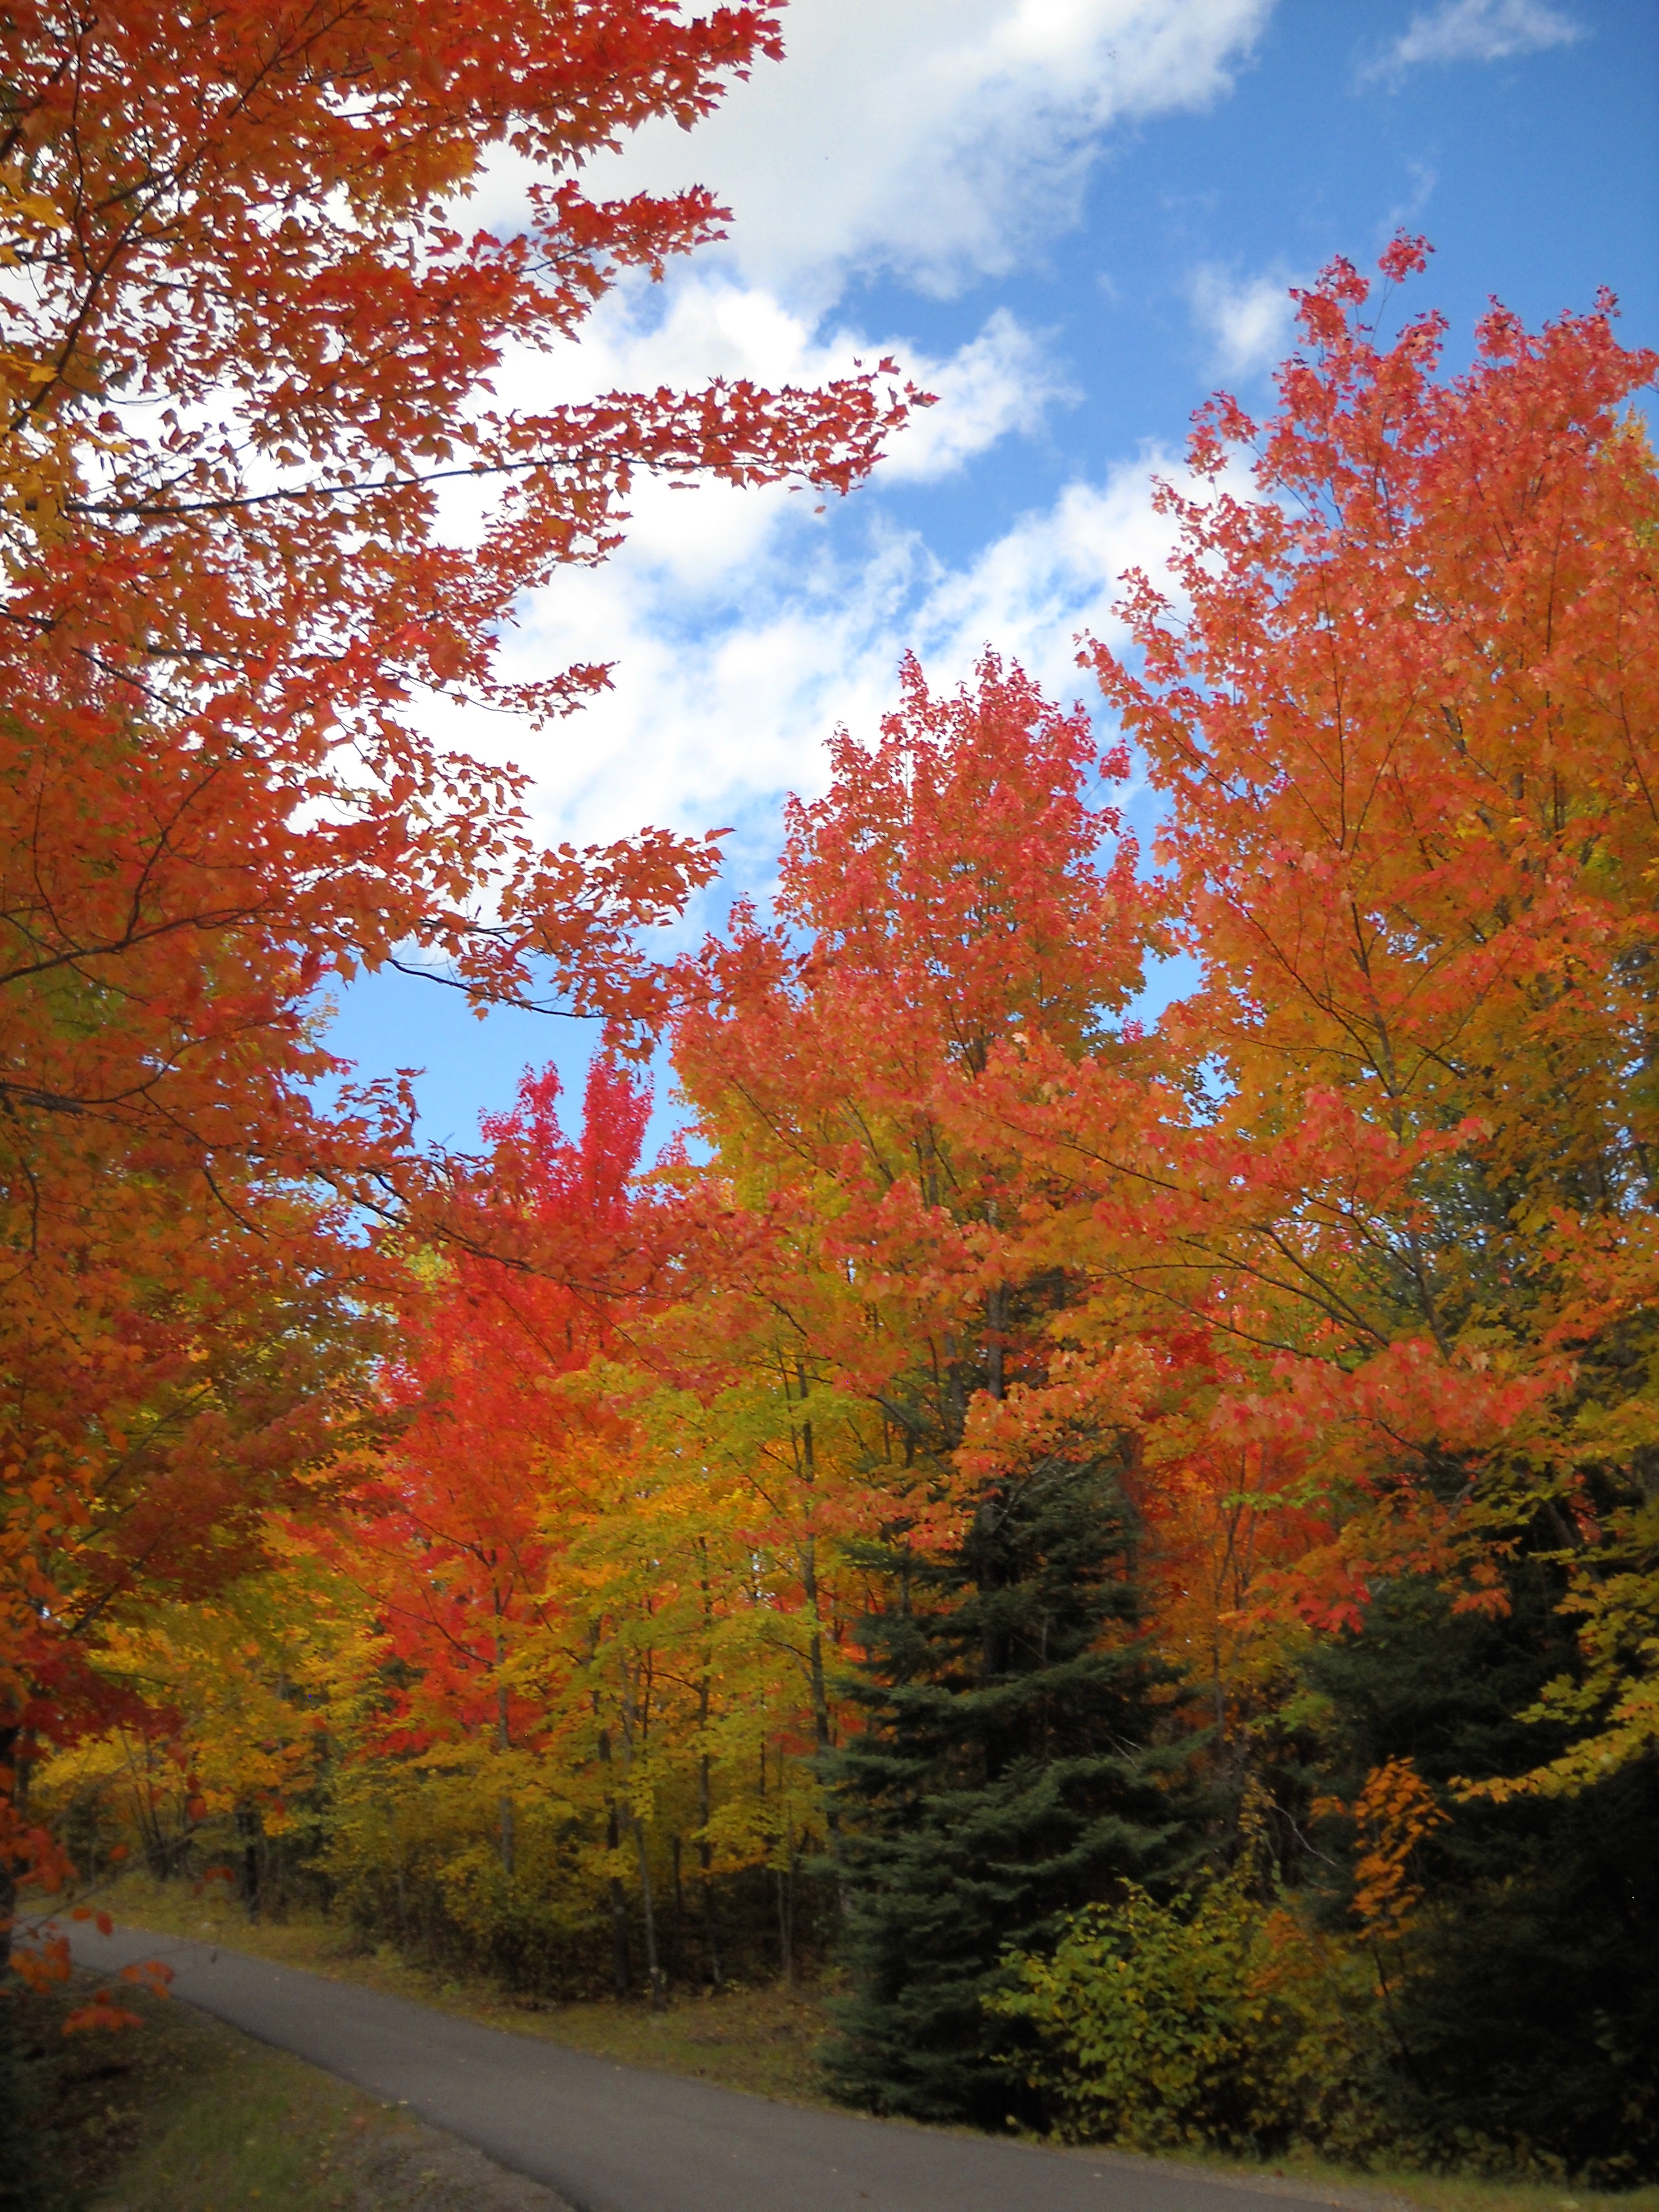 orange, yellow, and green colors are showing in the fall foliage